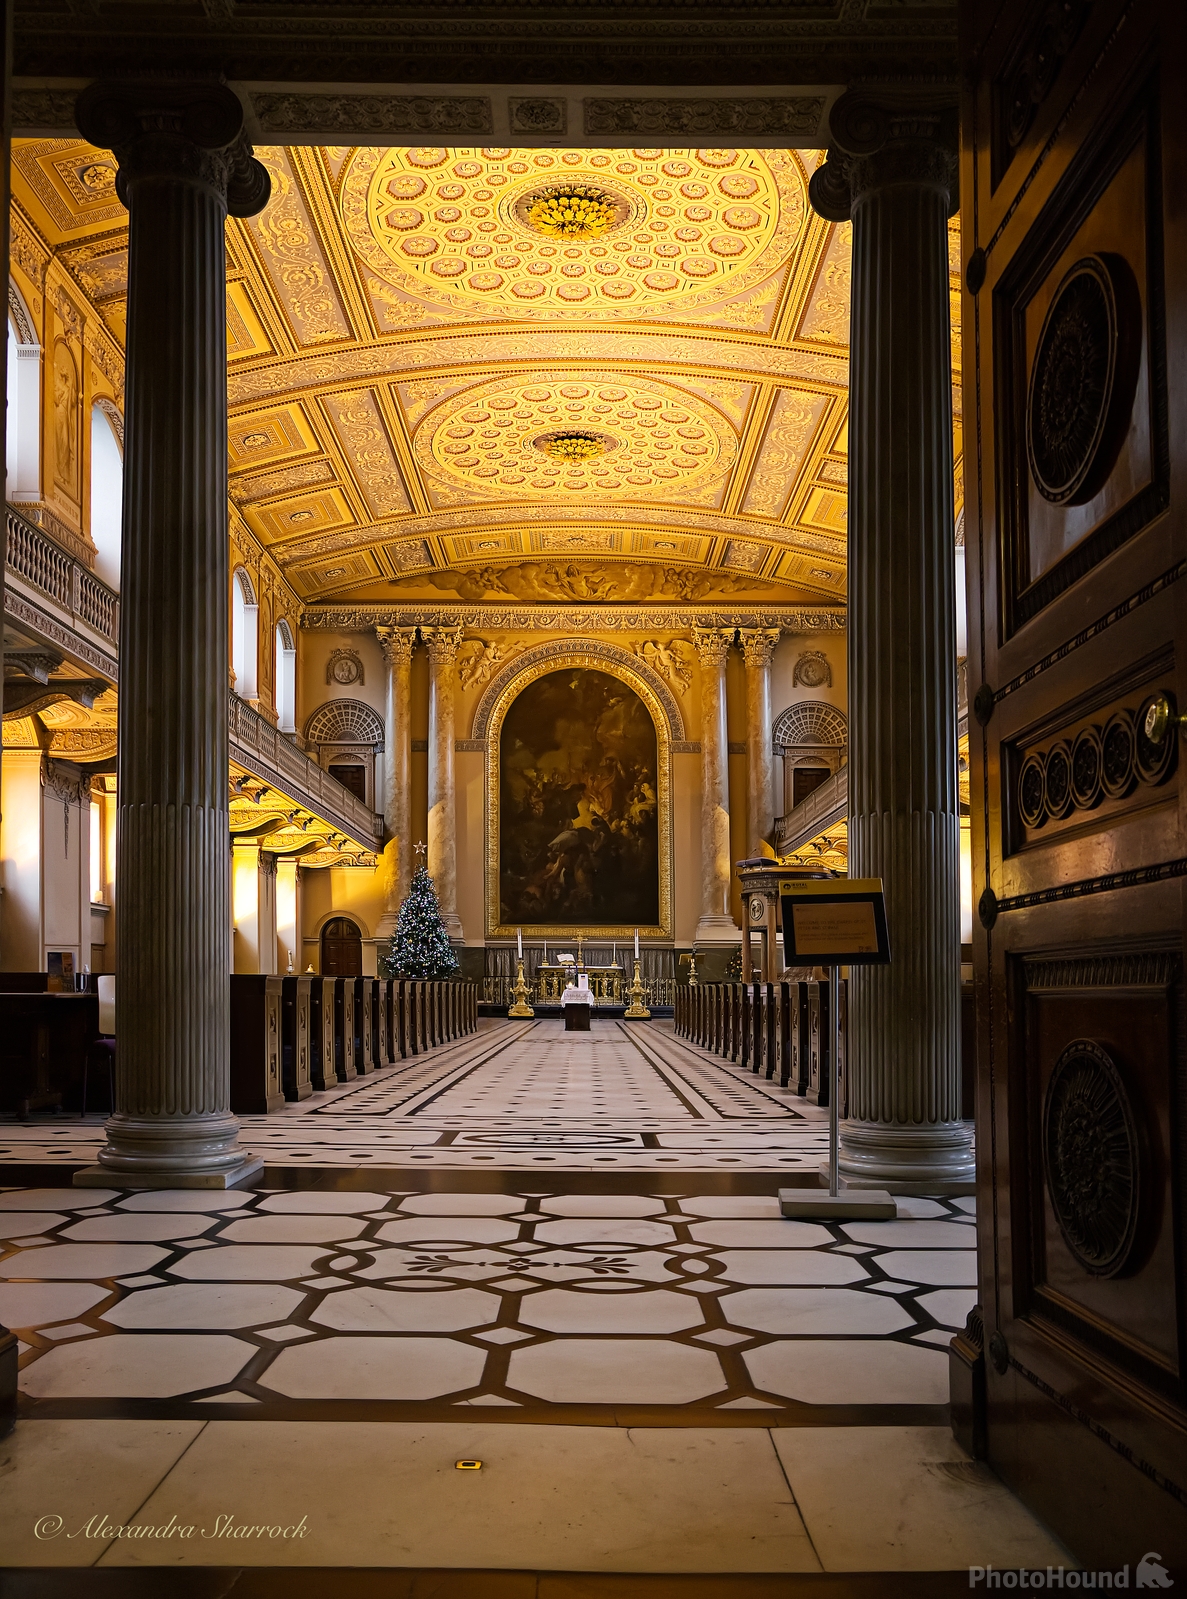 Image of The Old Royal Naval College, Greenwich by Alexandra Sharrock